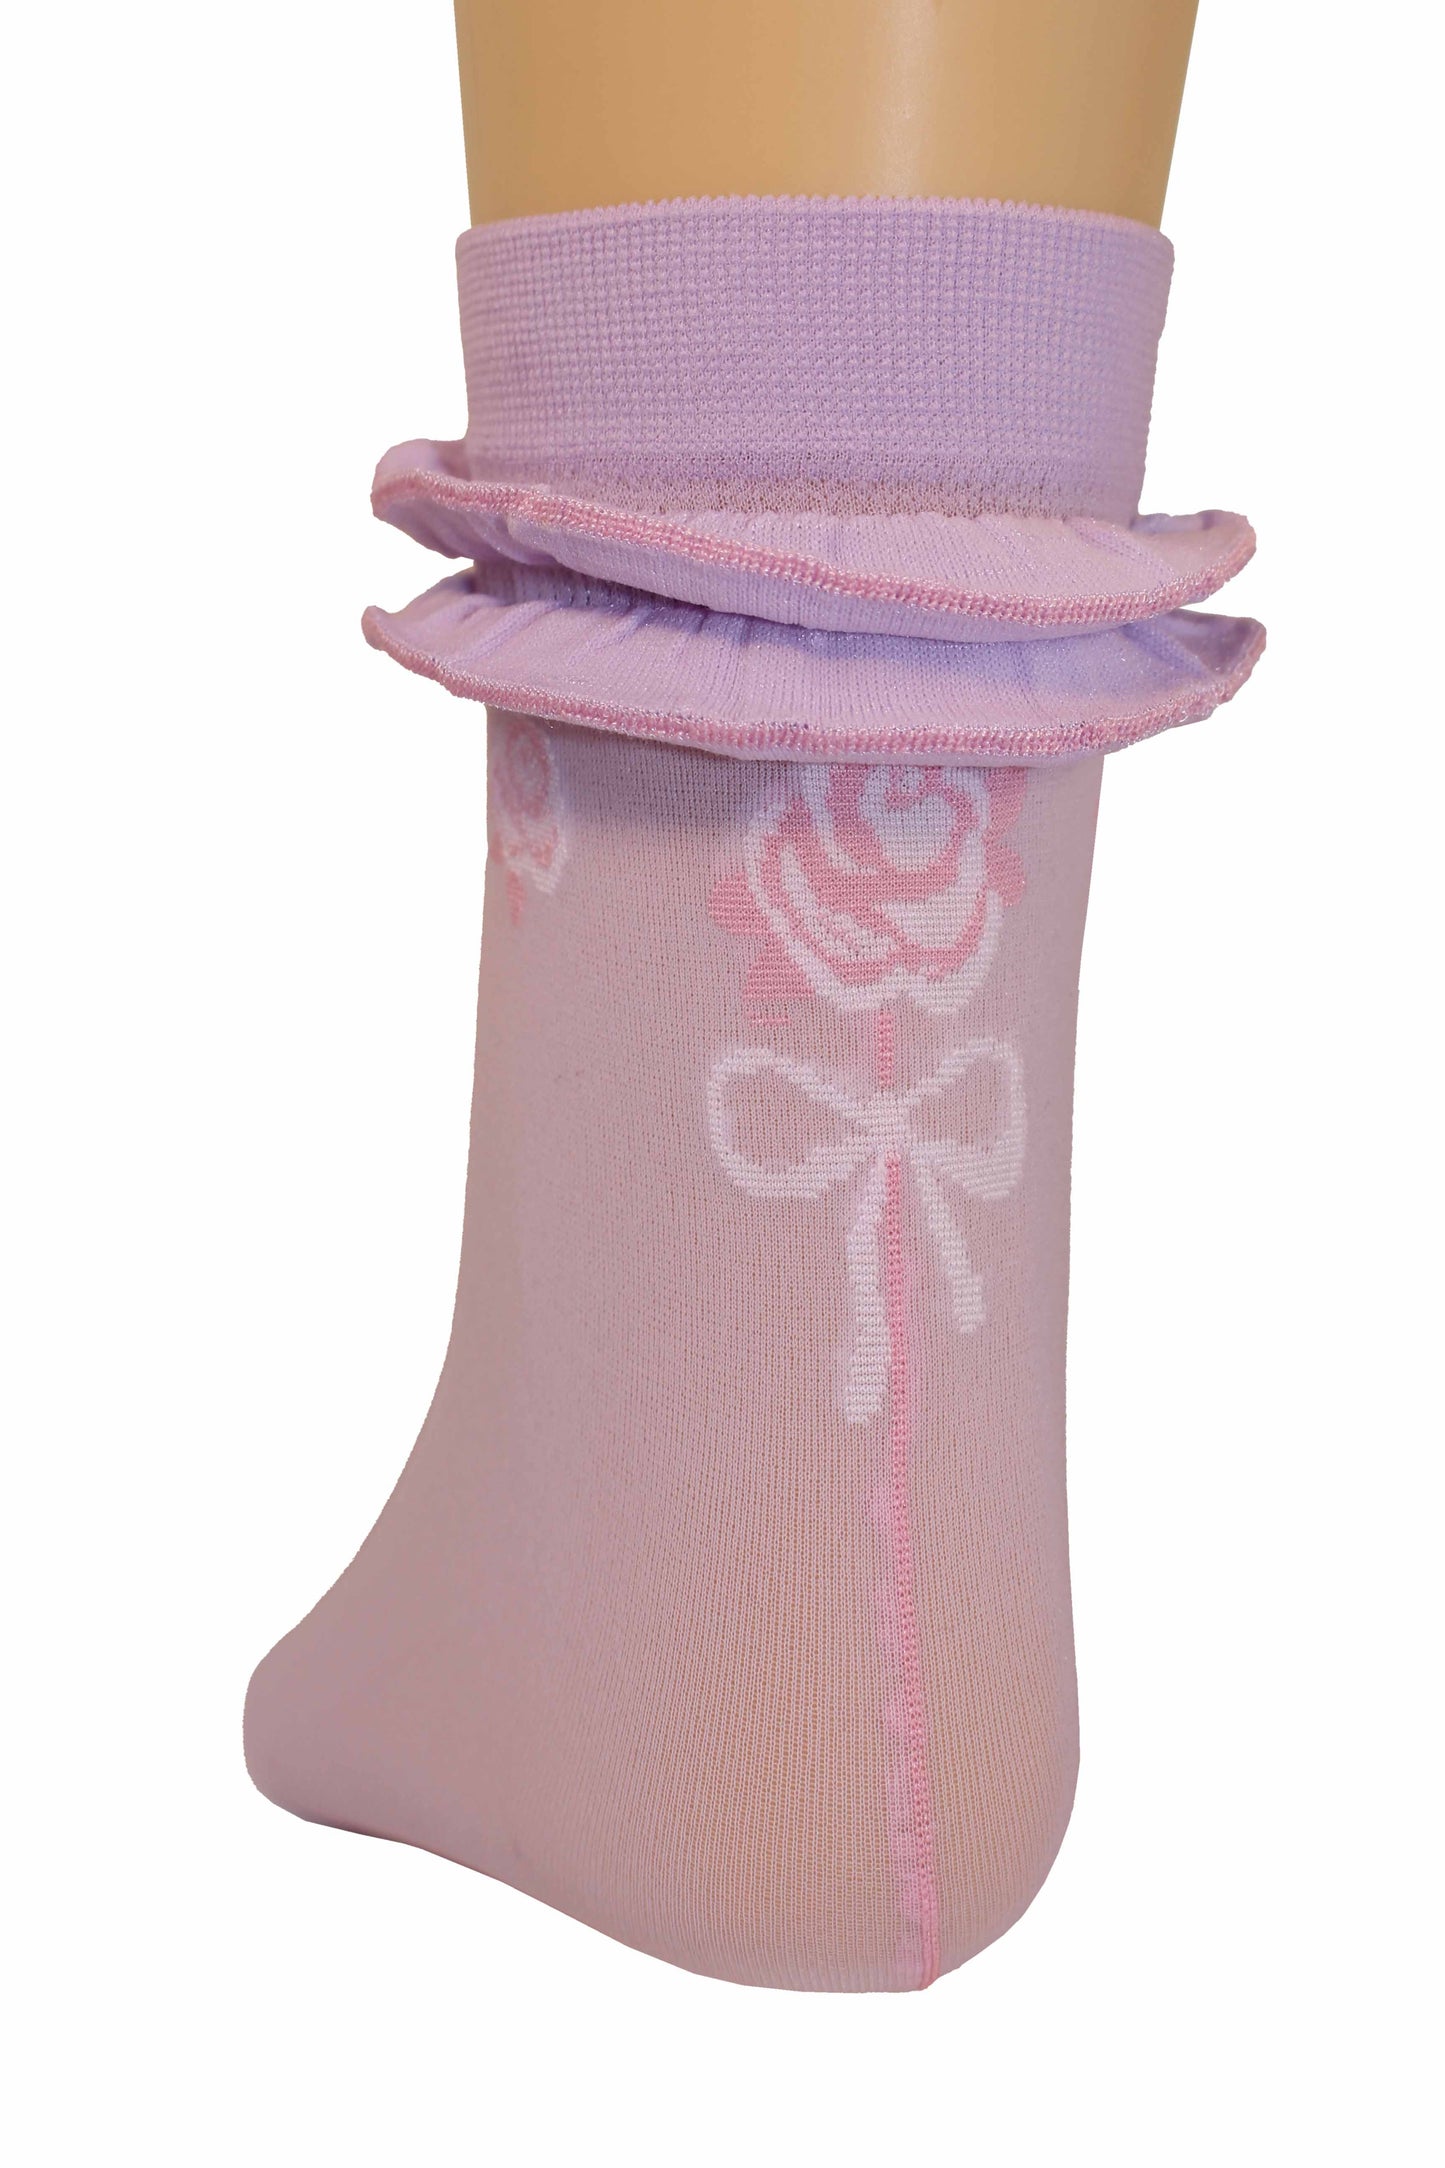 Omsa Lulu Calzino - Light lilac purple opaque children's fashion ankle socks with a double frill cuff, rose pattern under the cuff and a back seam with a bow detail in pink and off white.